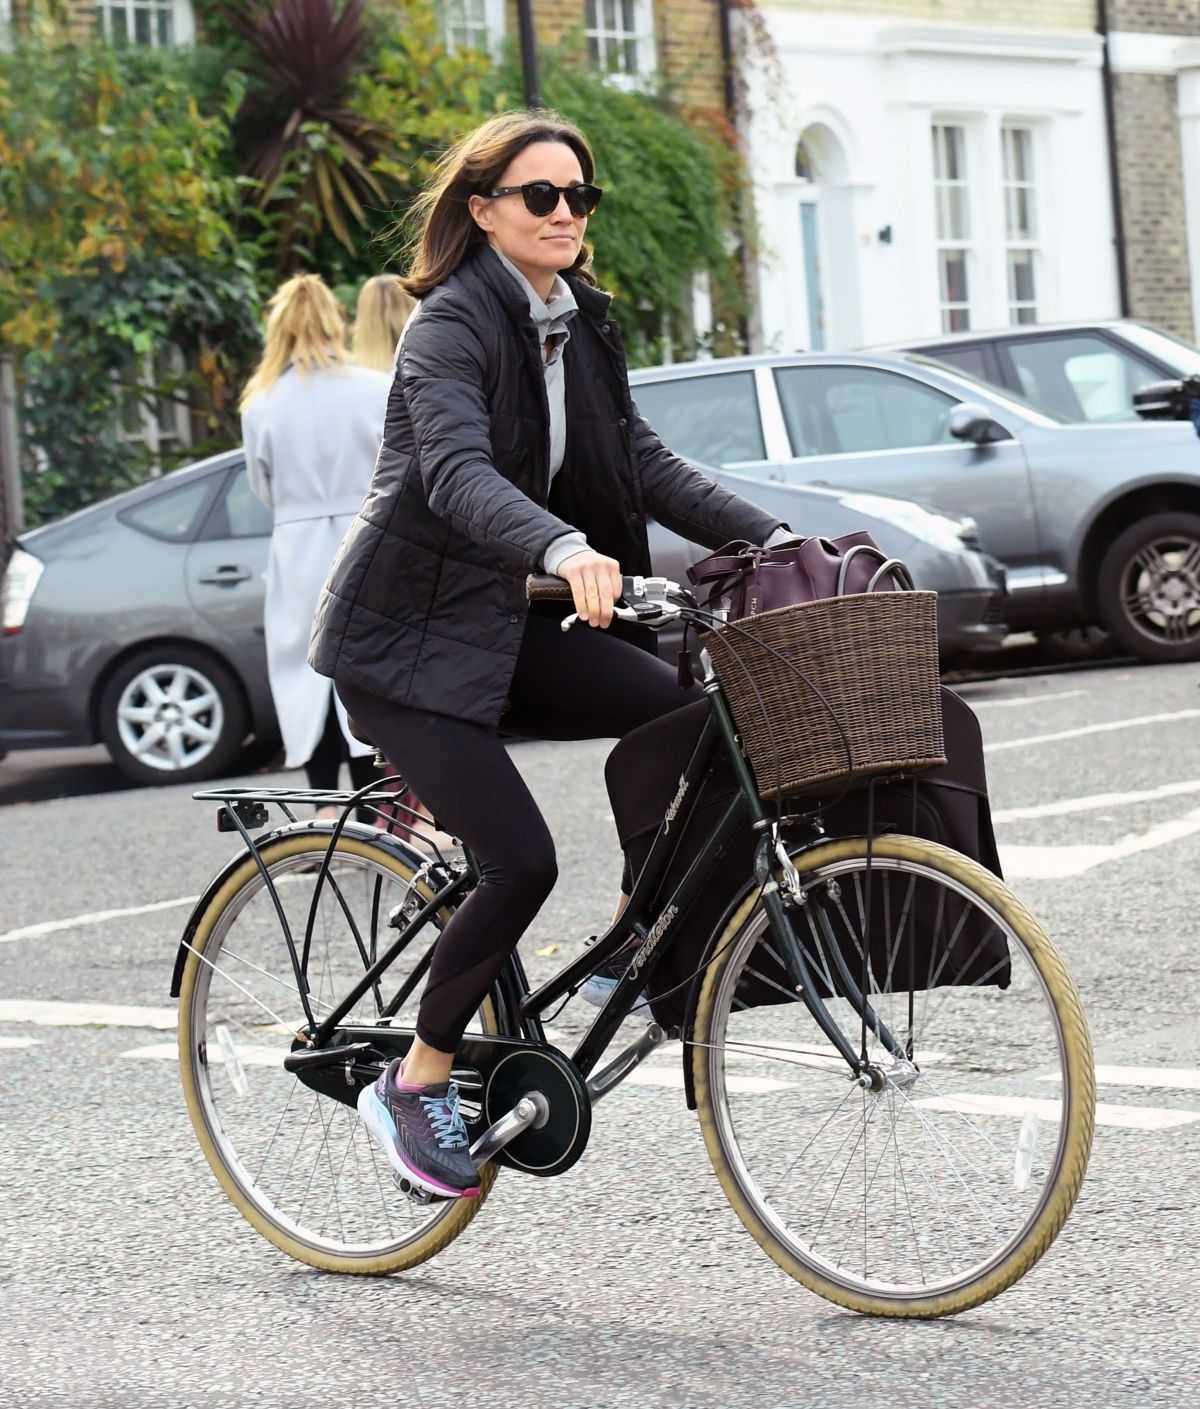 pippa-middleton-out-riding-a-bicycle-in-london-11-09-2017-5.jpg